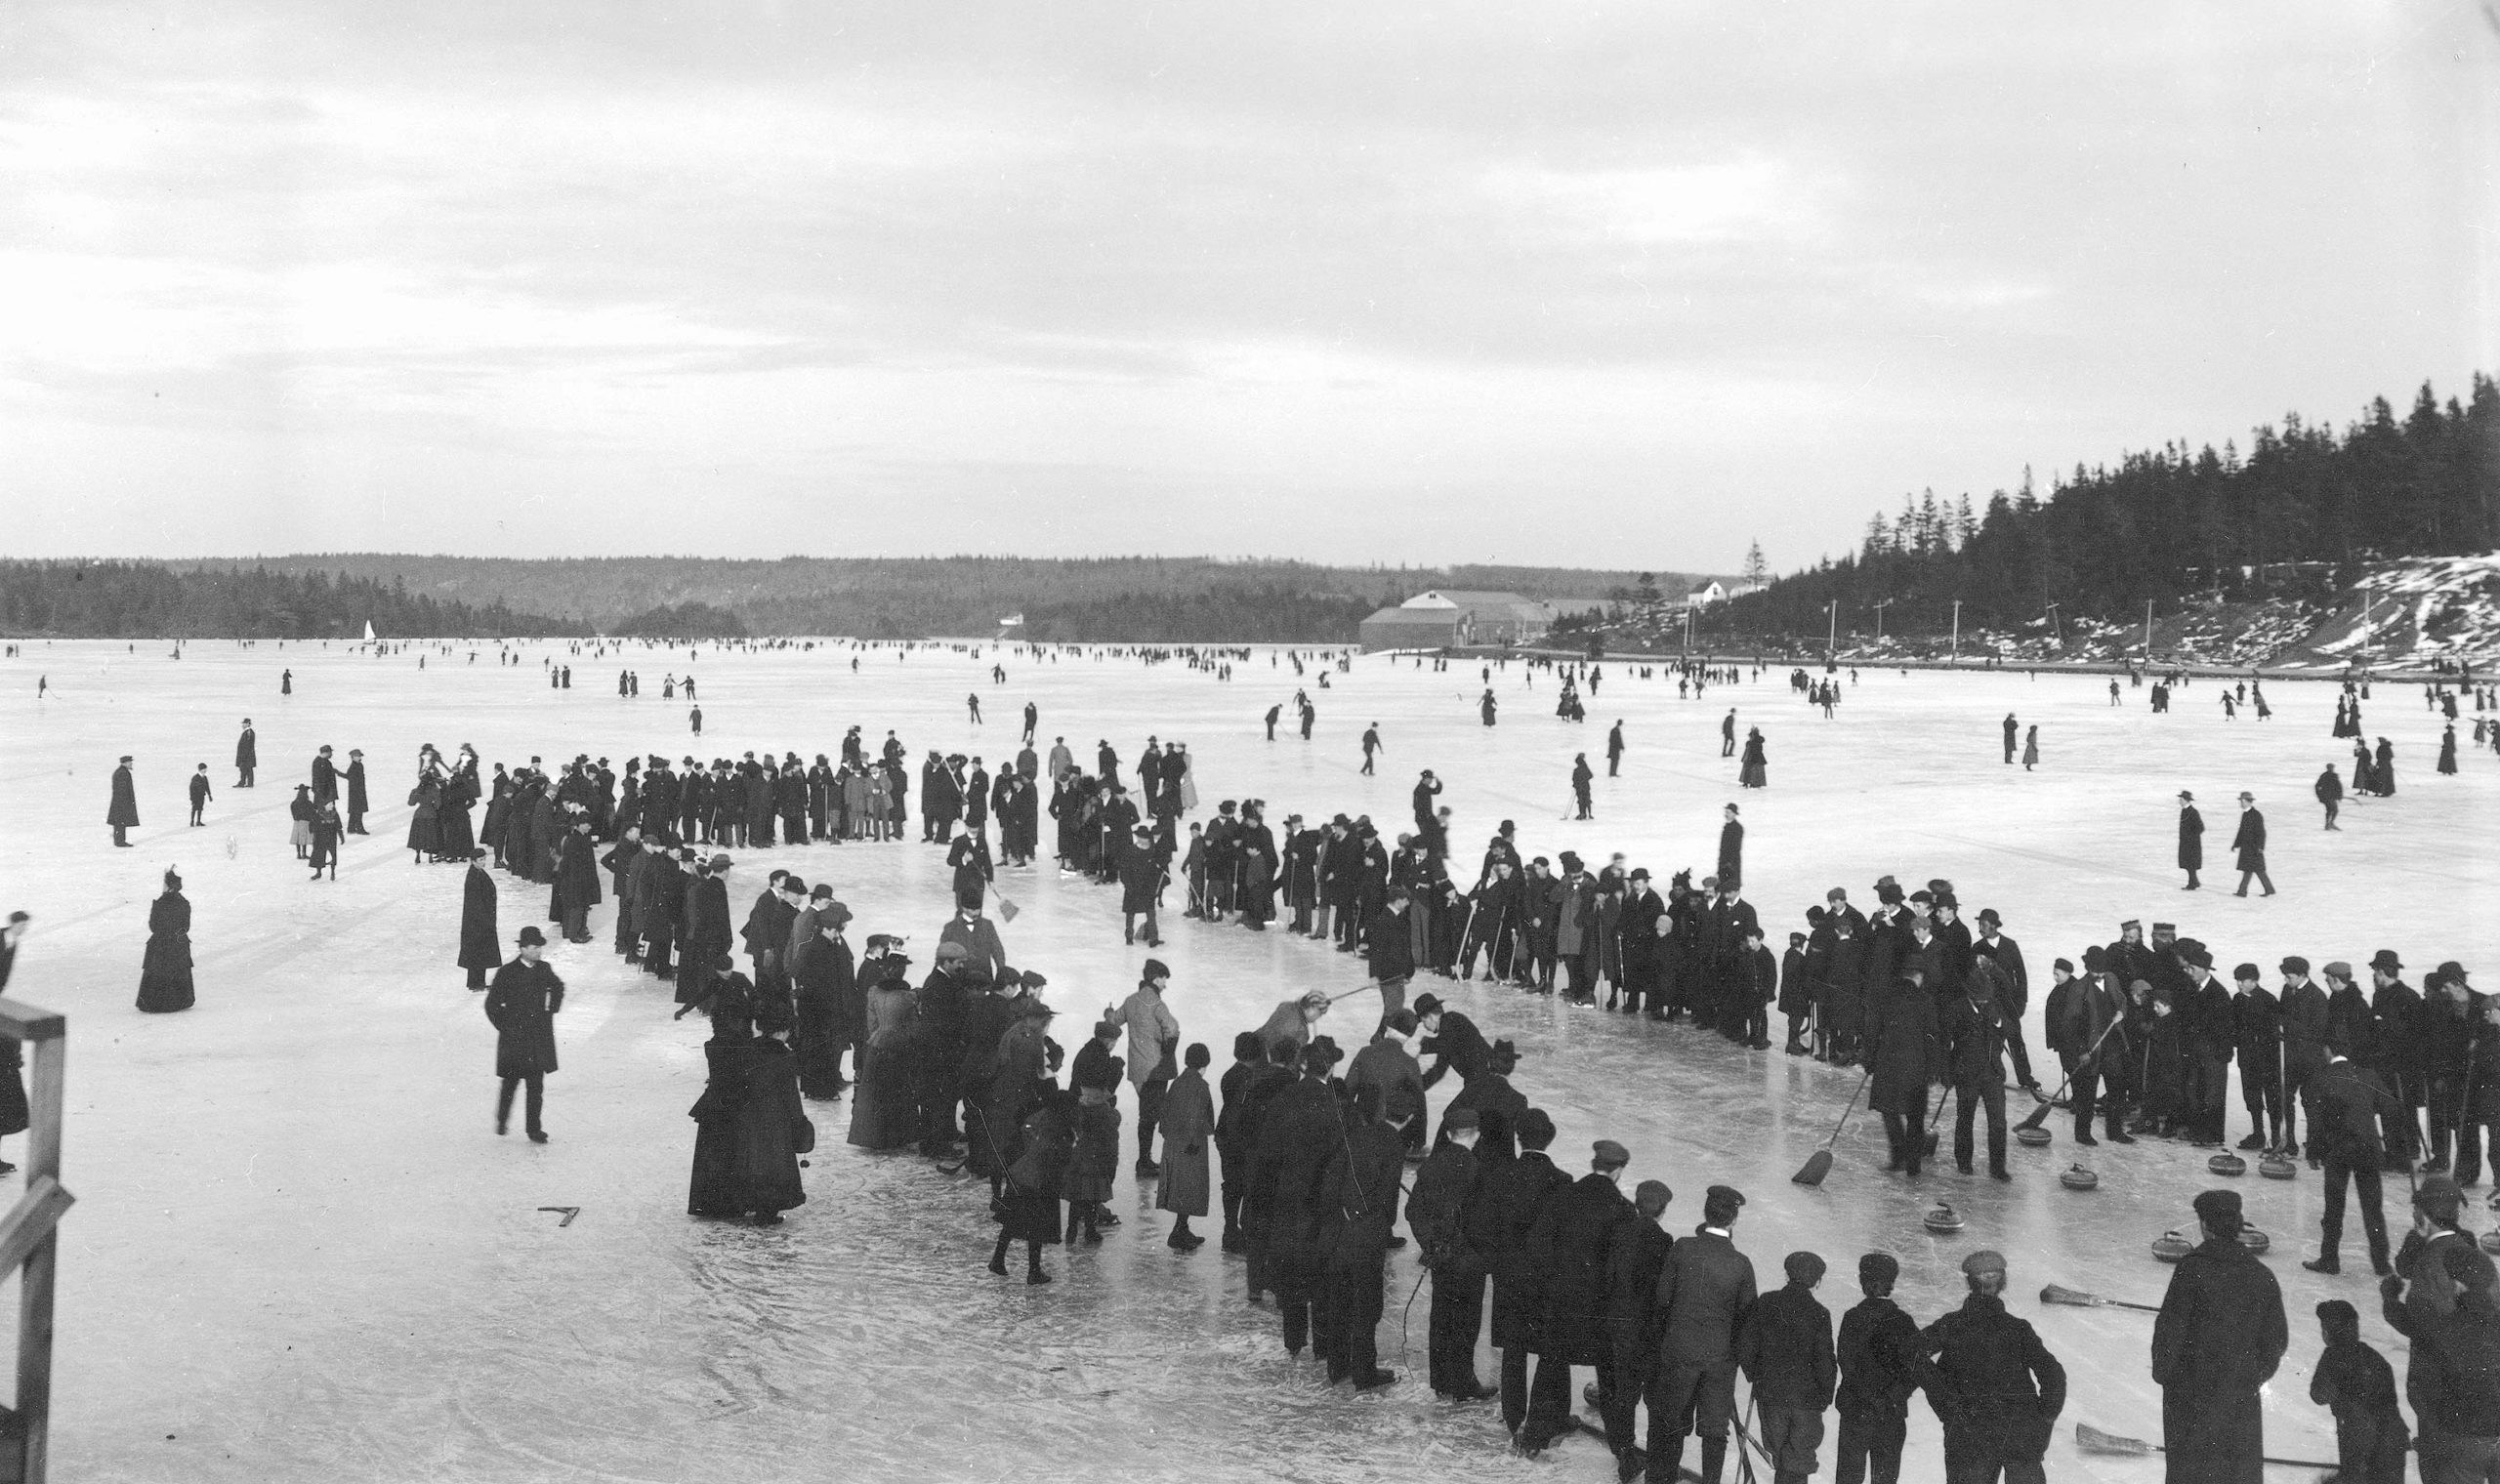 People line a curling rink on a frozen lake. People skate and play in the snow in the background.